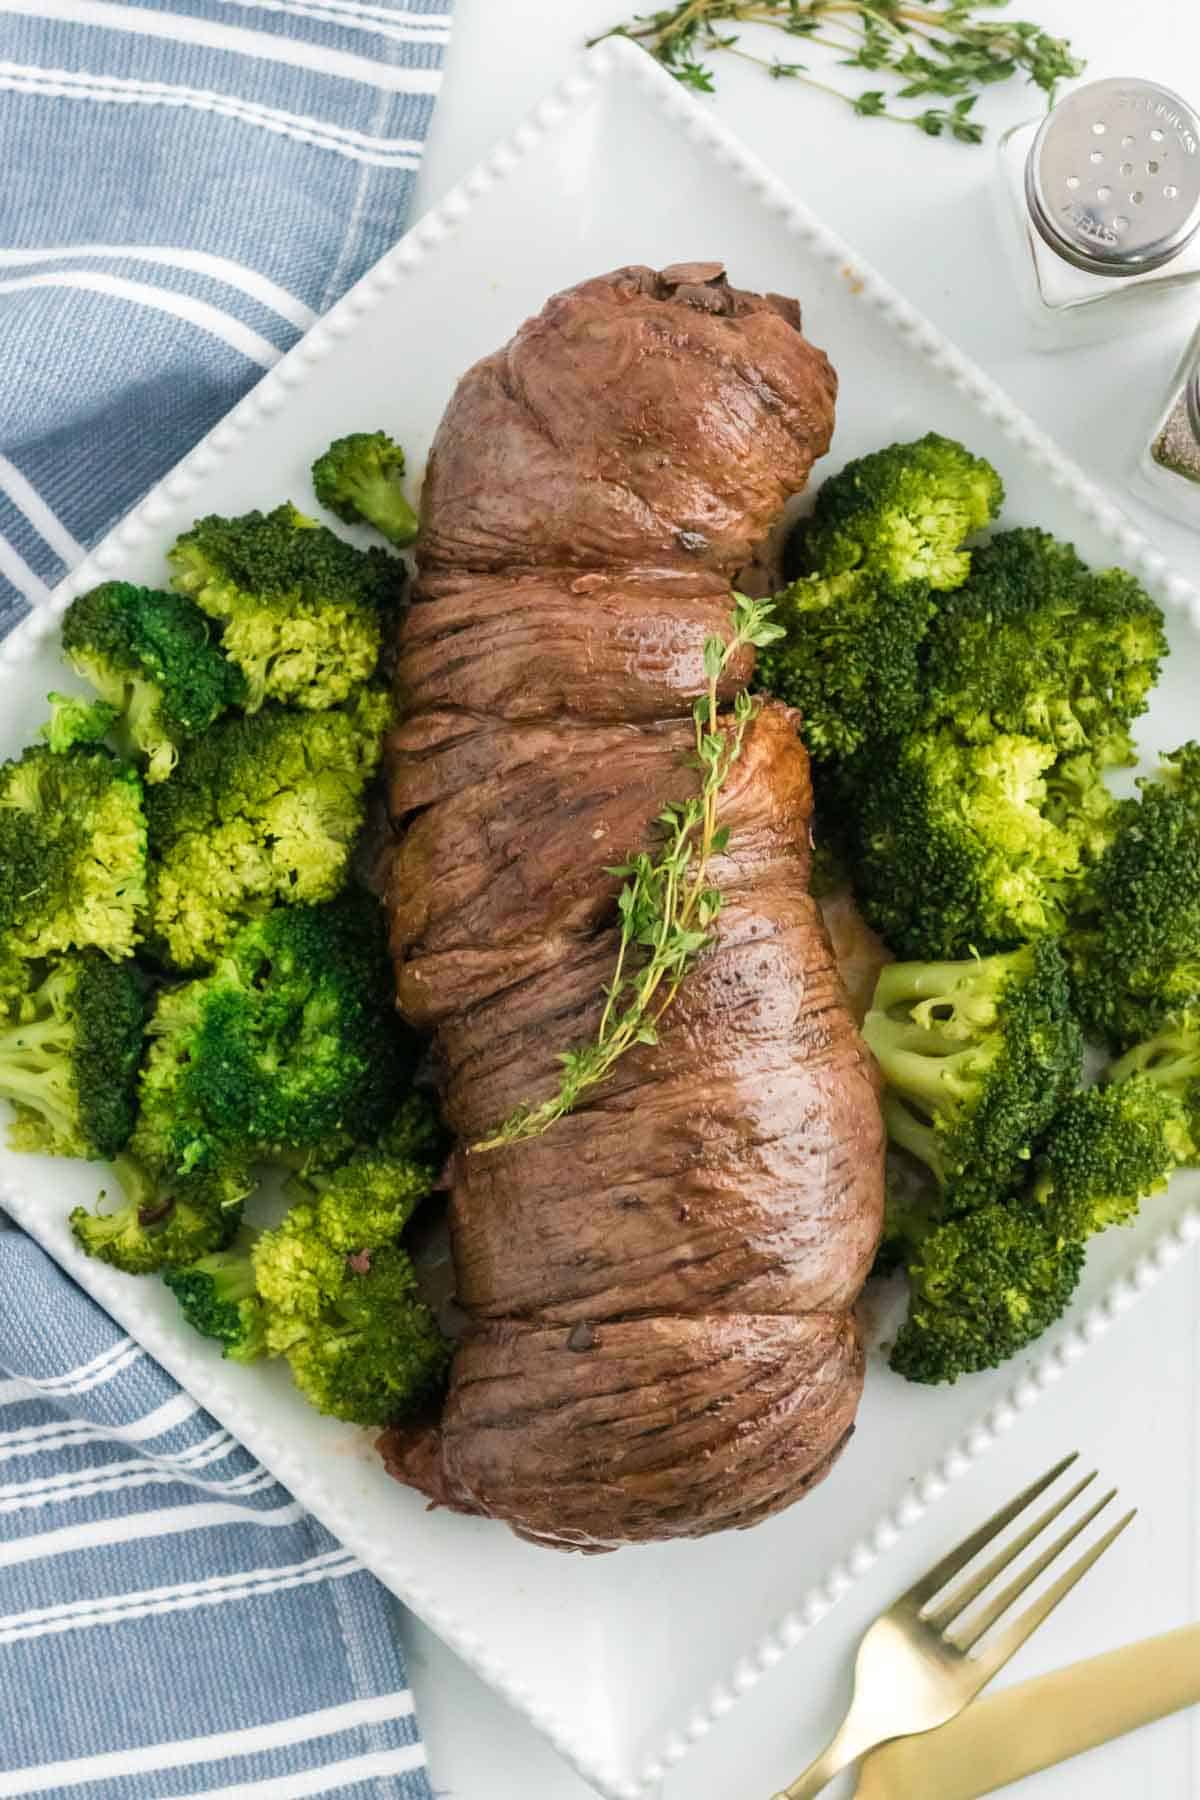 Top view of braised mushroom stuffed beef braciole on a plate next to cooked broccoli.